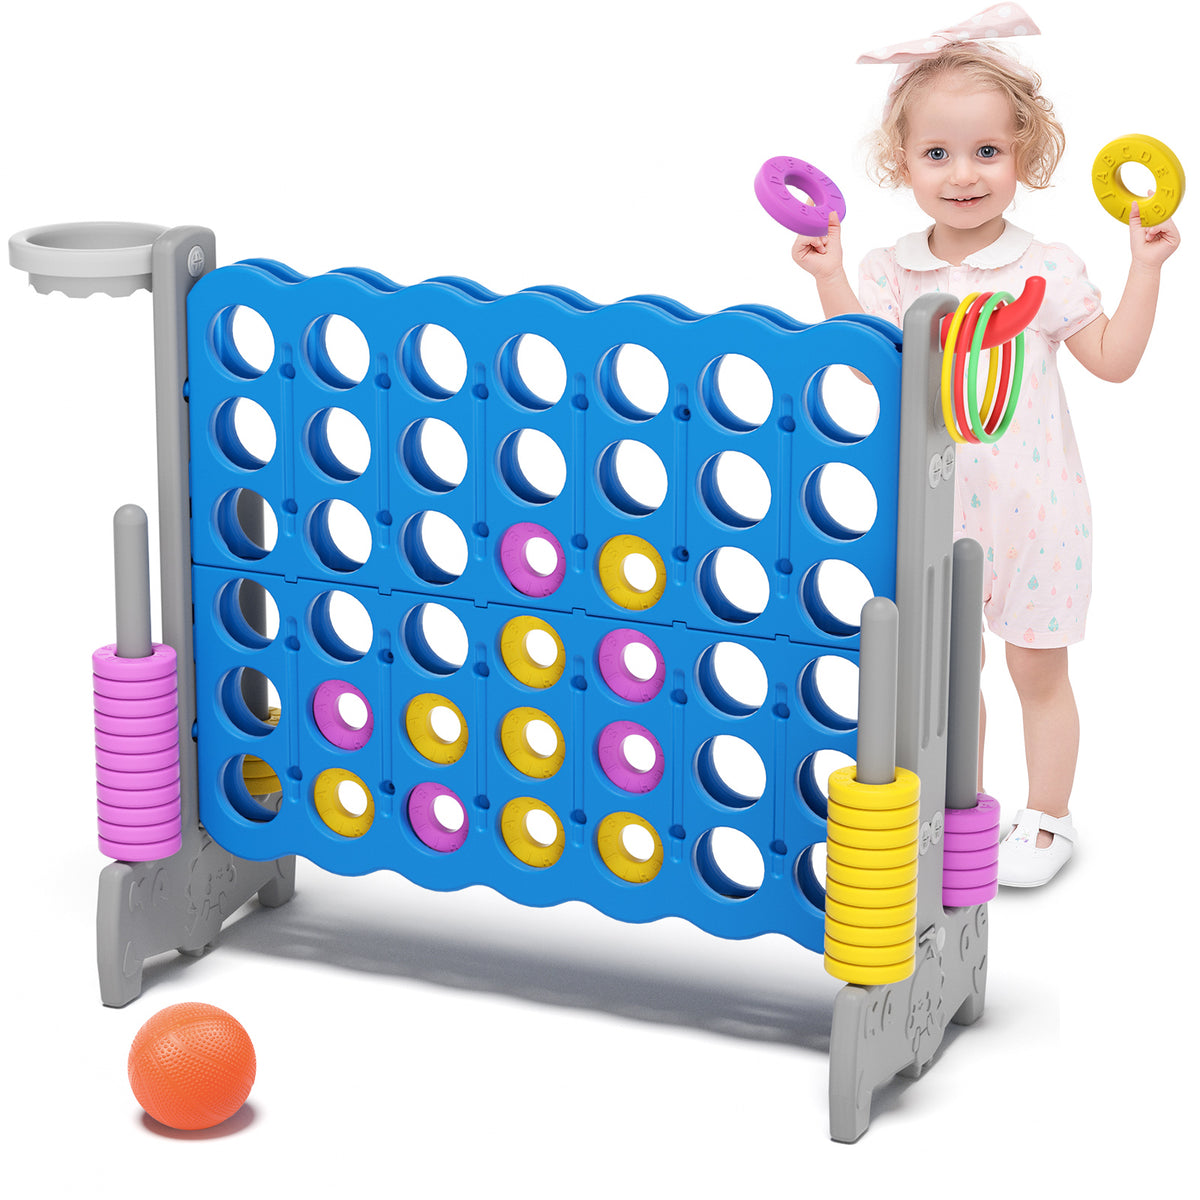 XJD Giant 4-in-A-Row Jumbo Game, 4-to-Score Game Set with Basketball Hoop, Ring Toss, 42 Jumbo Rings, Indoor Outdoor Family Game for Kids & Adults. Blue&Gray